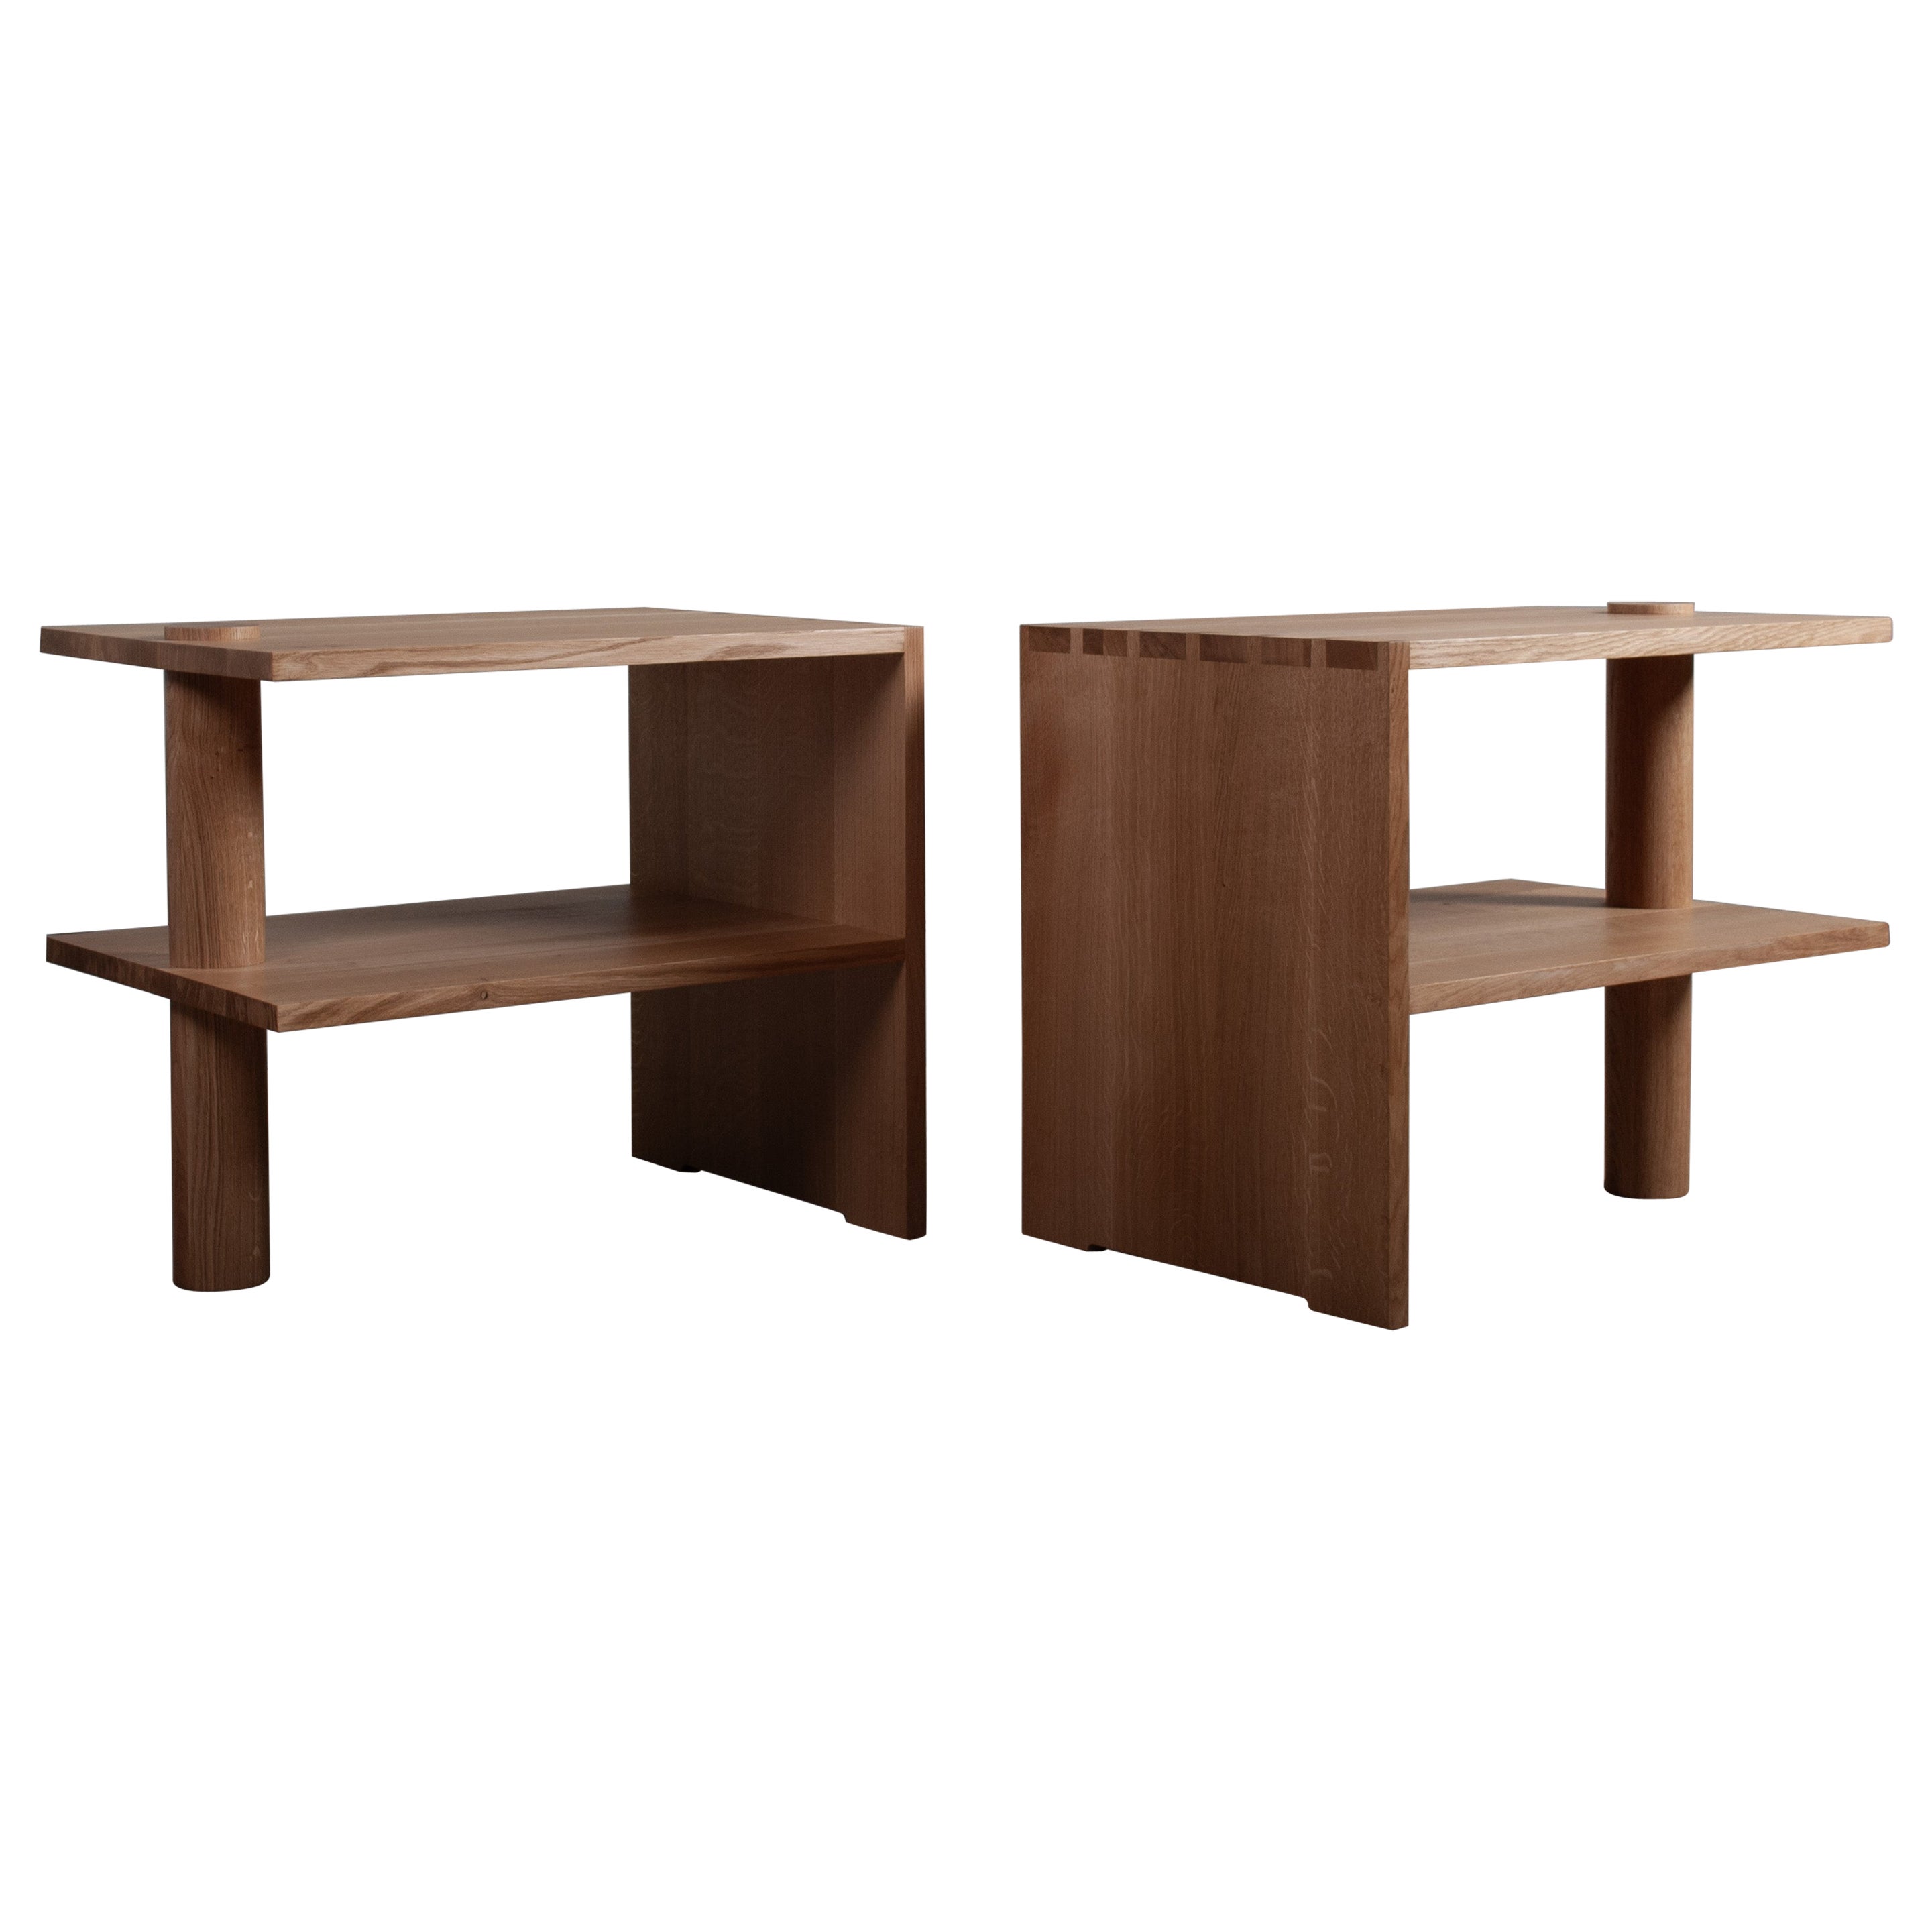 Huge Architectural Handcrafted English Oak Night Stands - End Tables For Sale